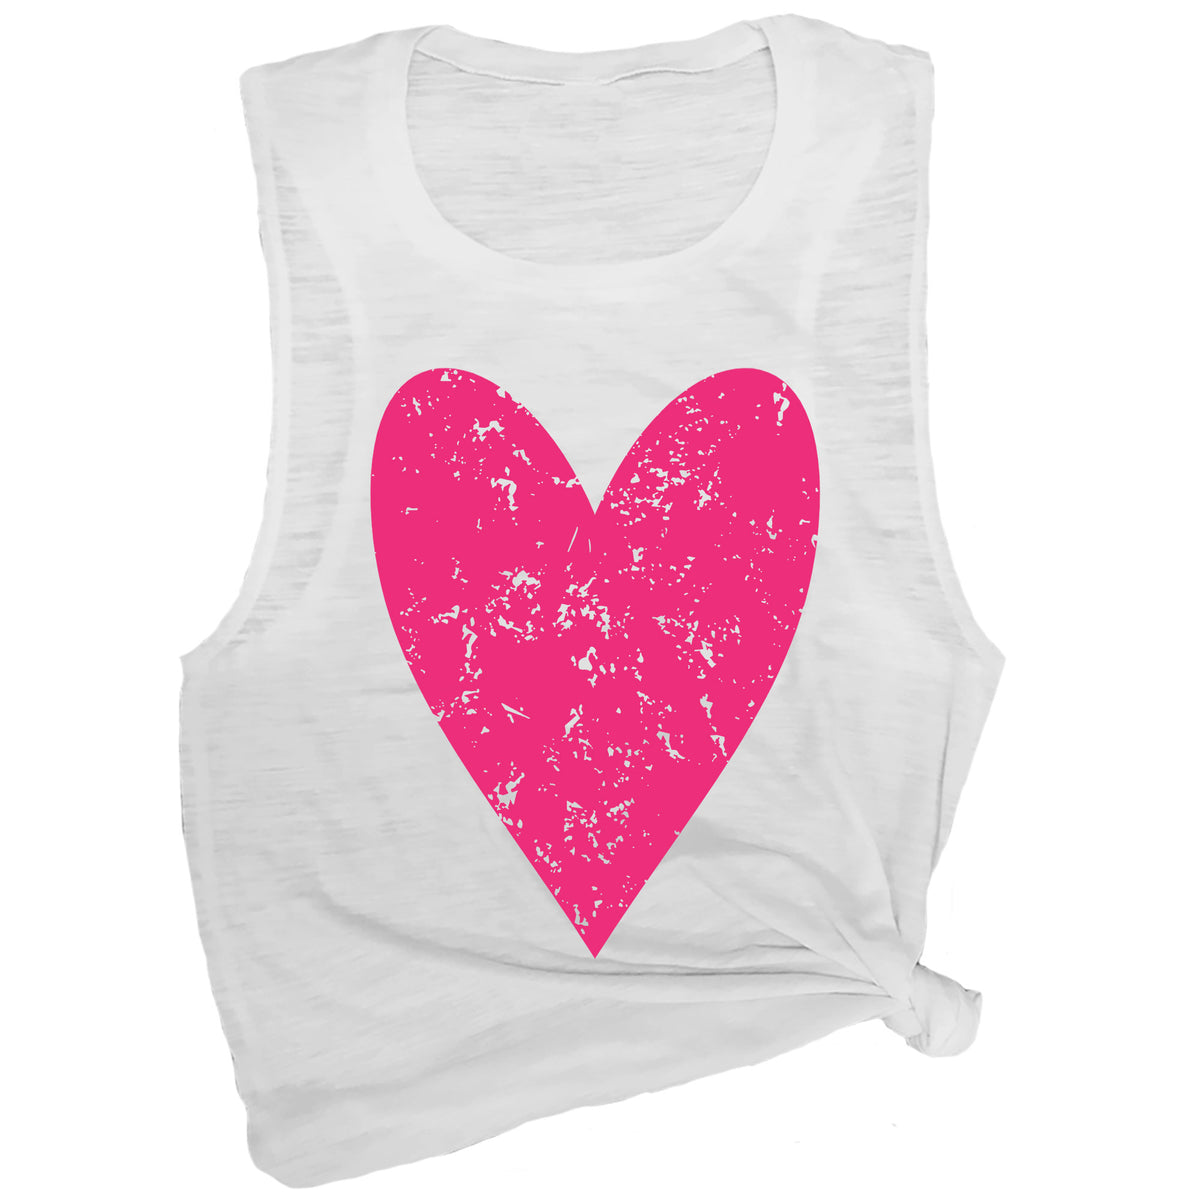 Distressed Heart Muscle Tee